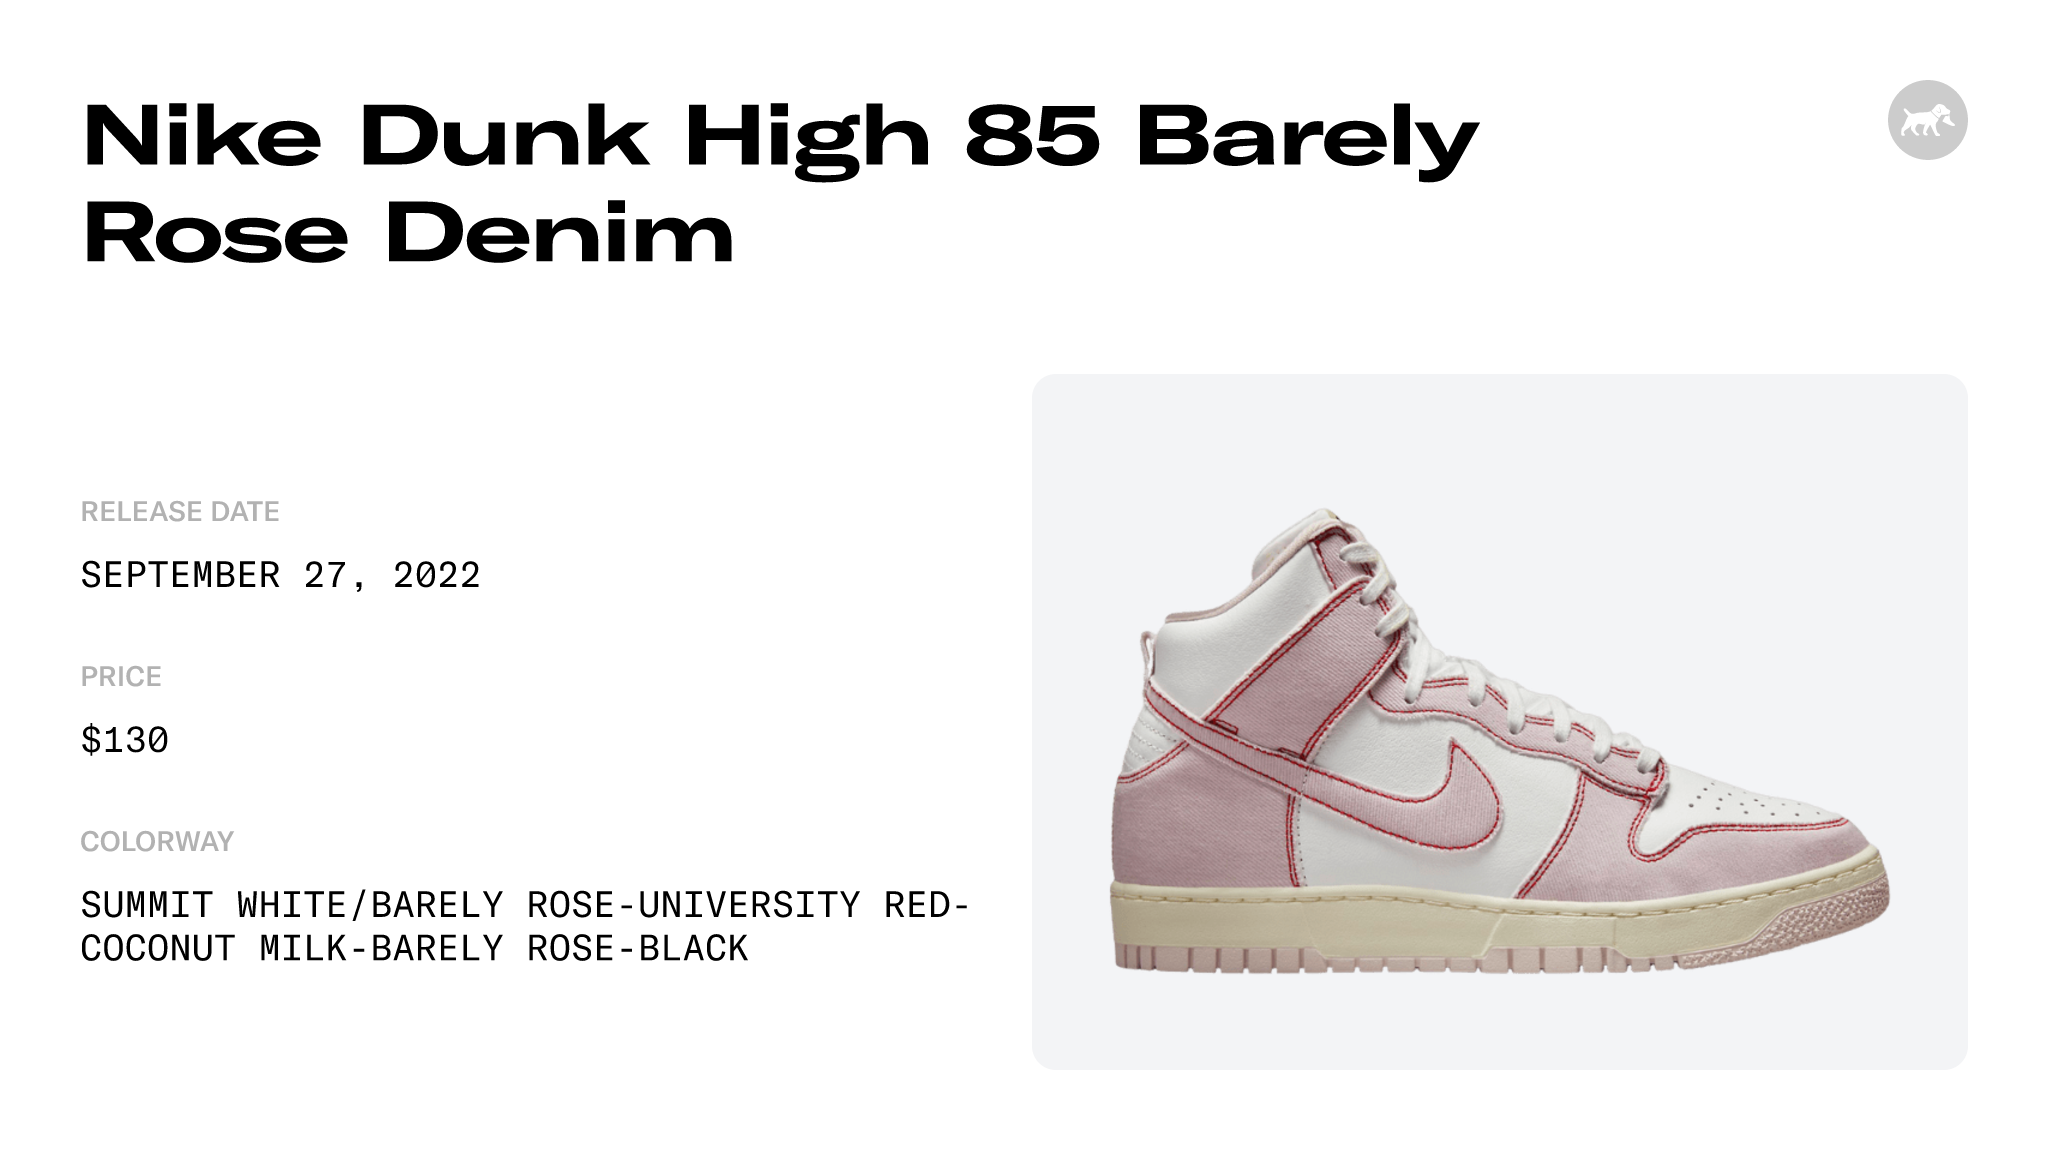 Nike Dunk High 85 Barely Rose Denim - DQ8799-100 Raffles and Release Date